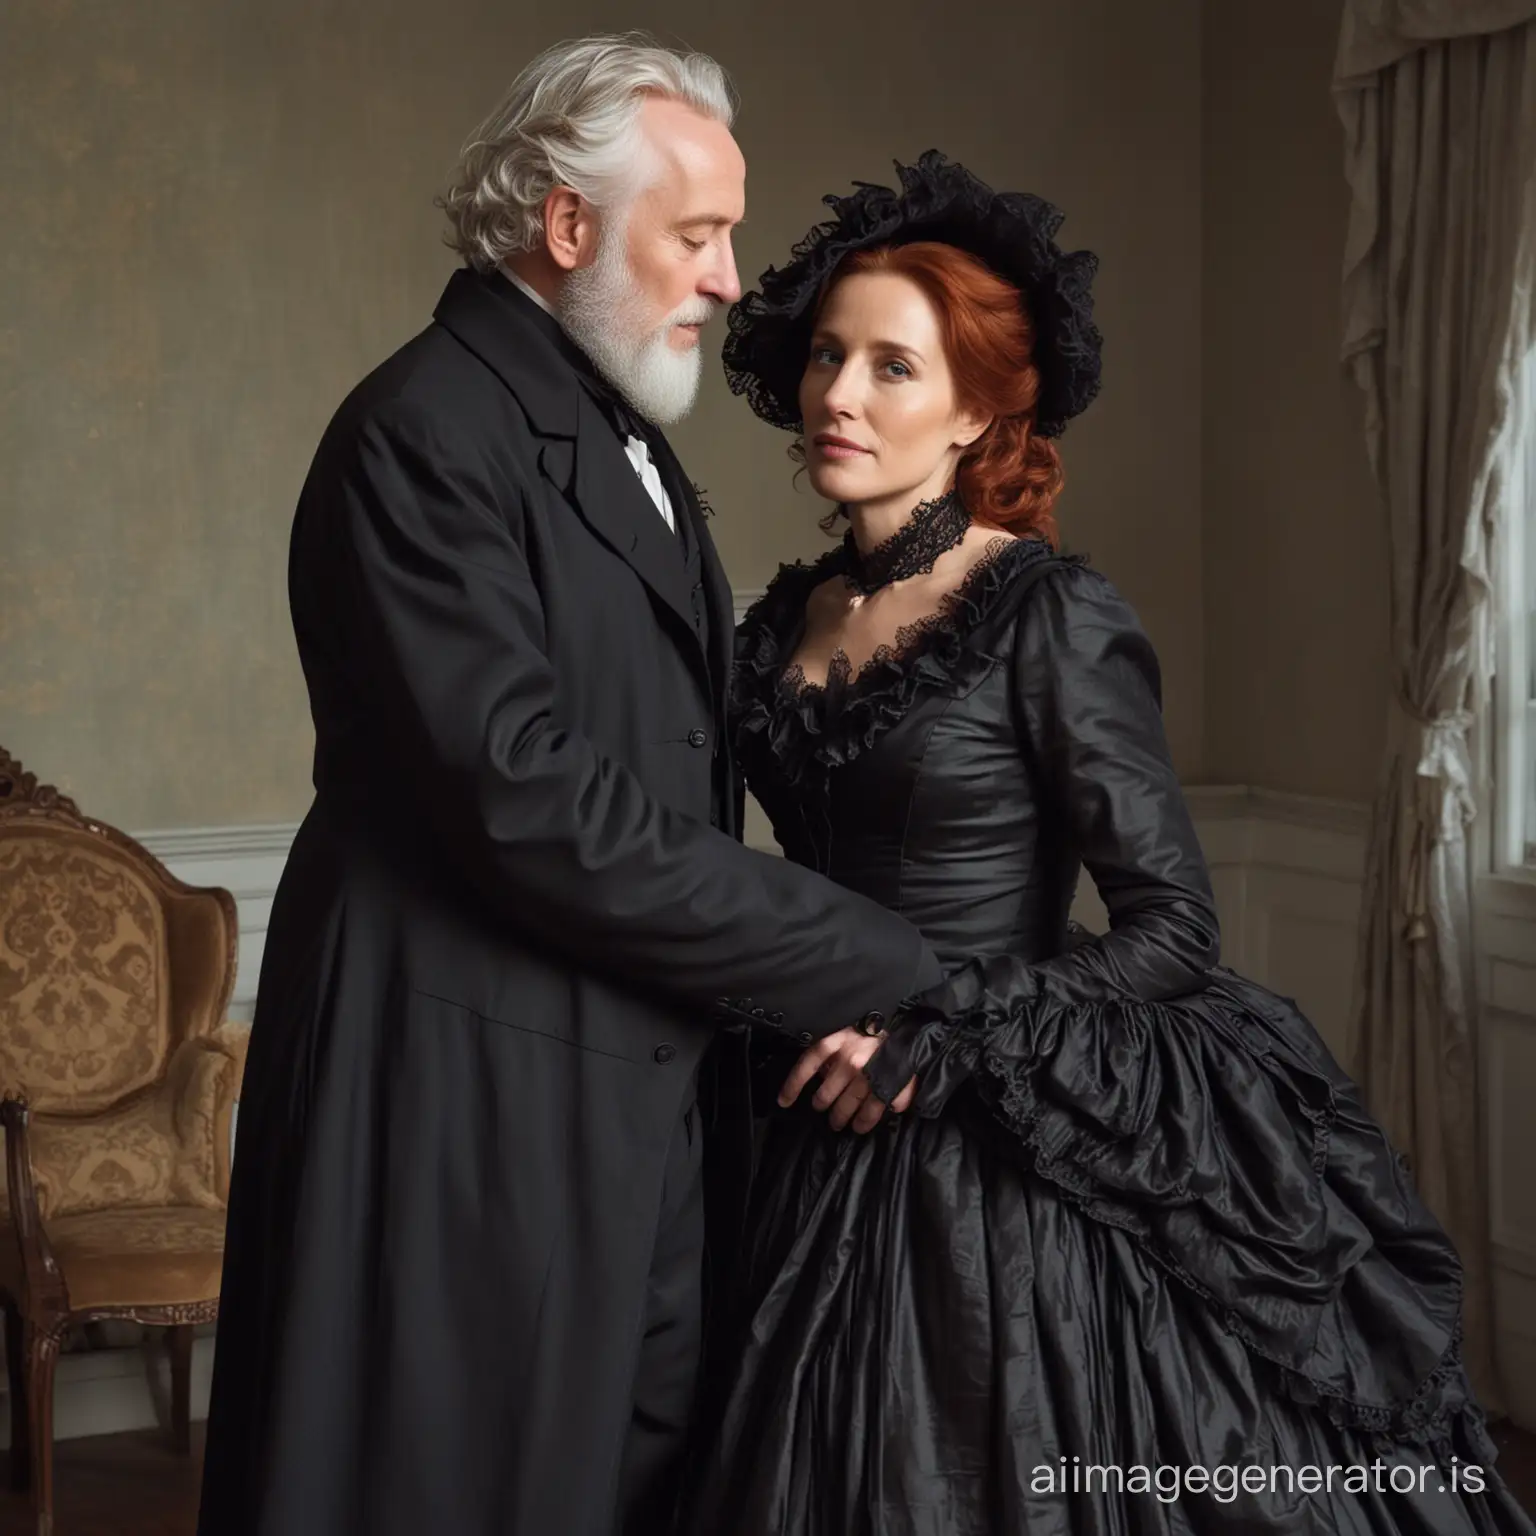 red hair Gillian Anderson wearing a dark brown floor-length loose billowing 1860 Victorian crinoline dress with a frilly bonnet kissing an old man dressed in a black Victorian suit who seems to be her newlywed husband